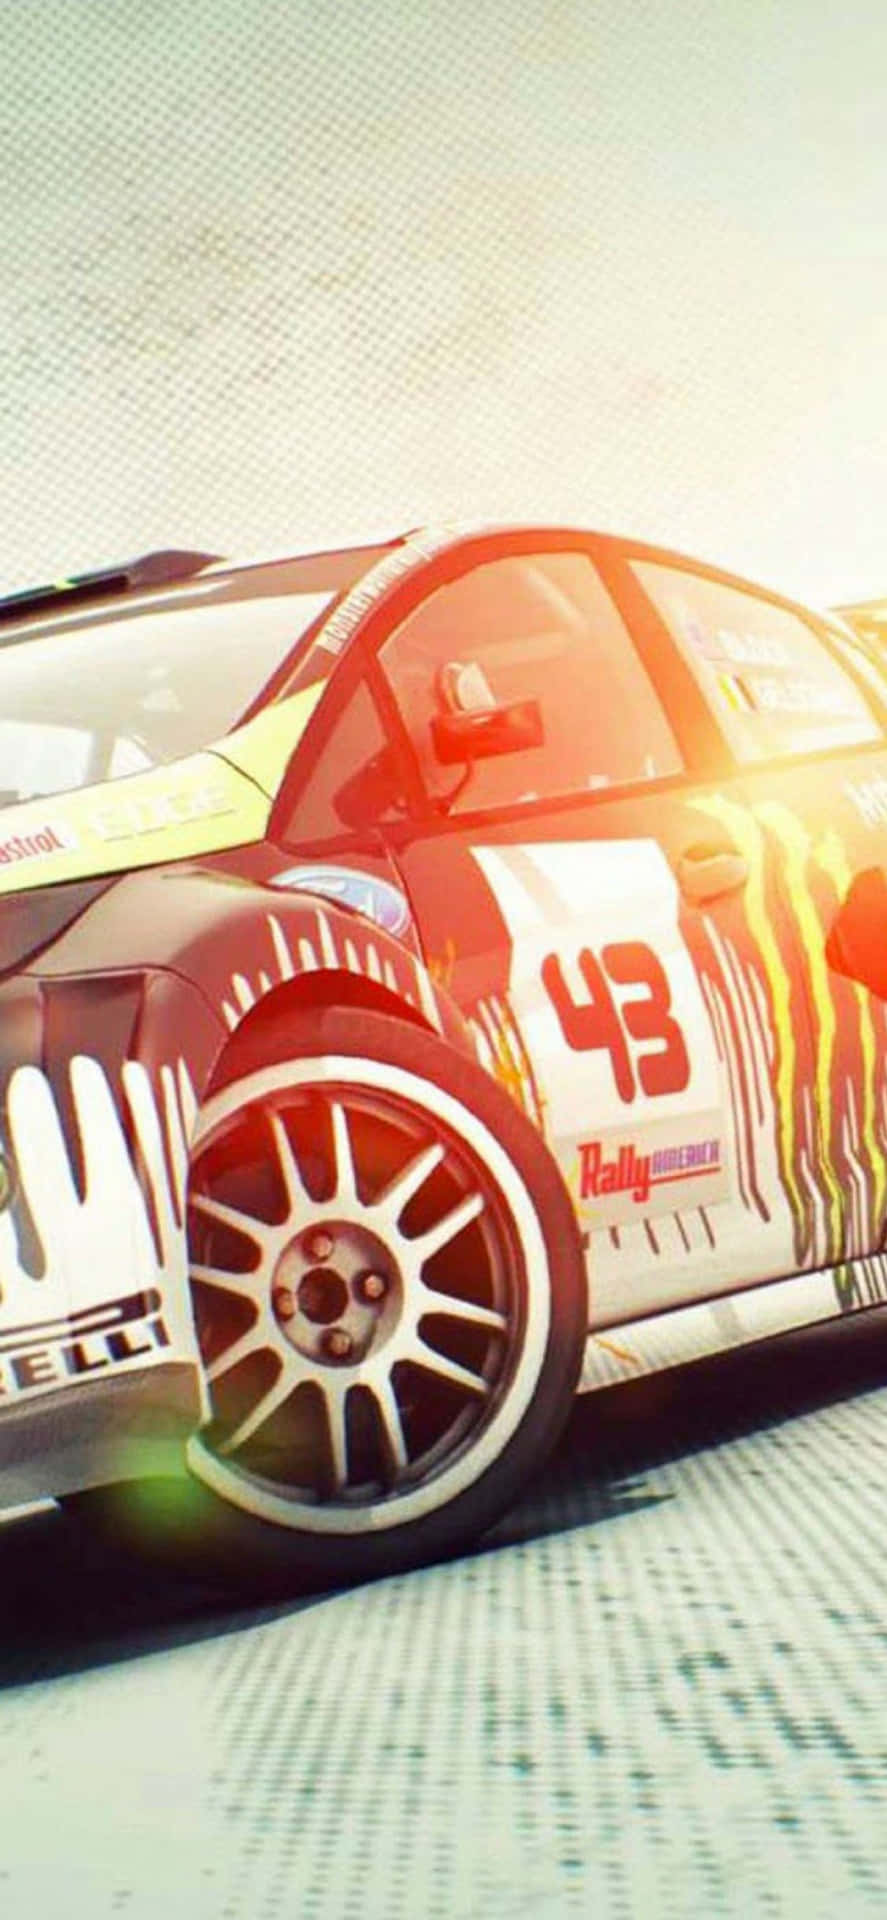 Enjoy/Discover the outdoor thrills of Dirt 3 with your Iphone Xs